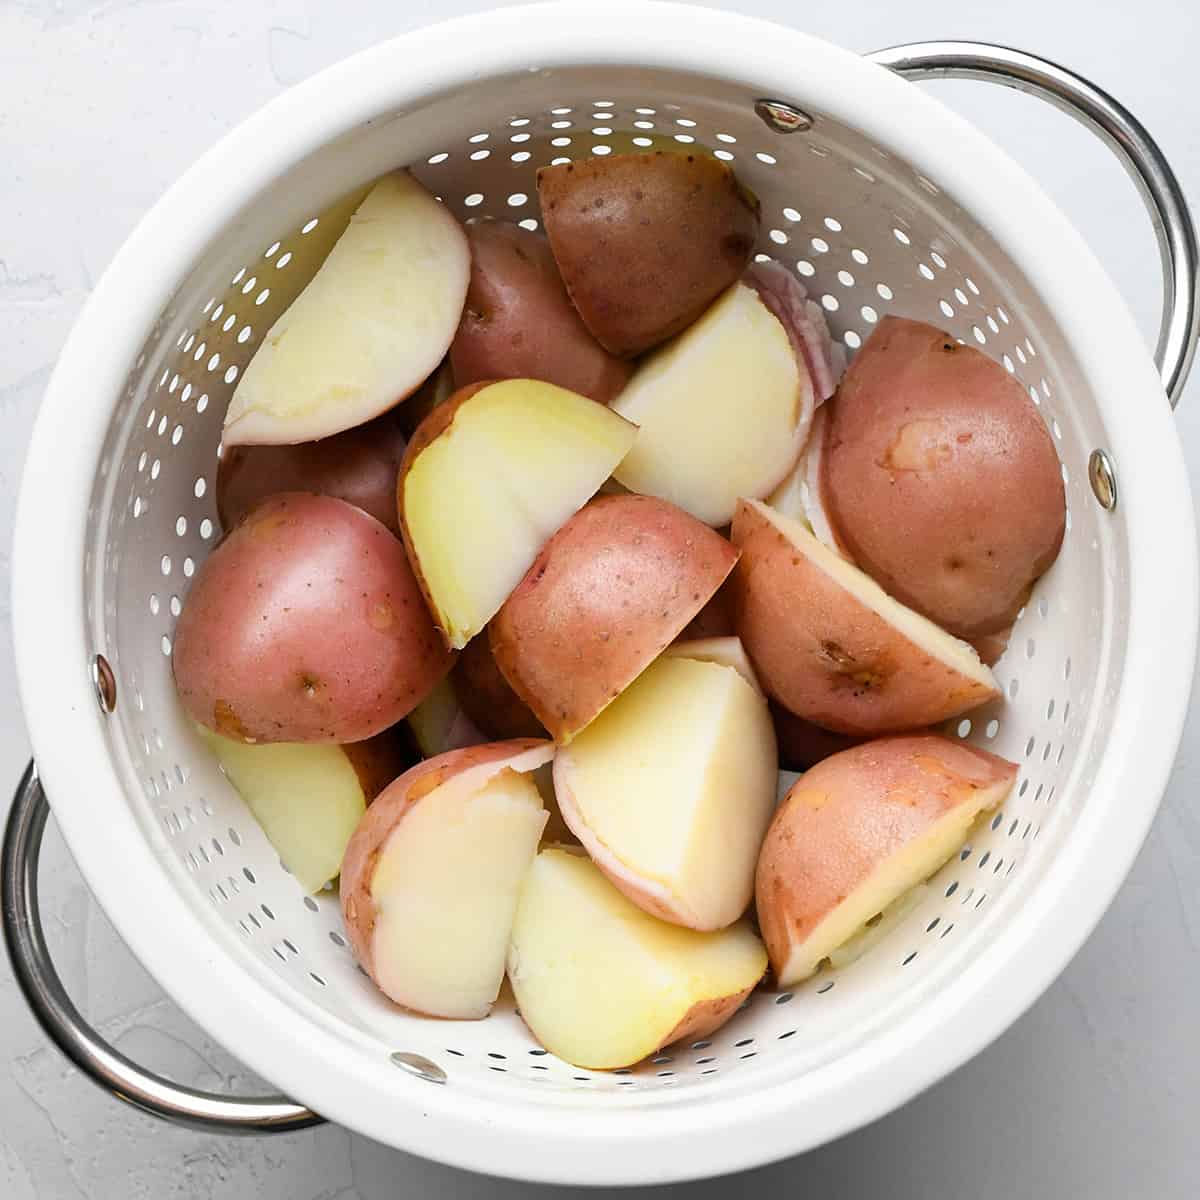 draining boiled potatoes in a colander to make potato salad